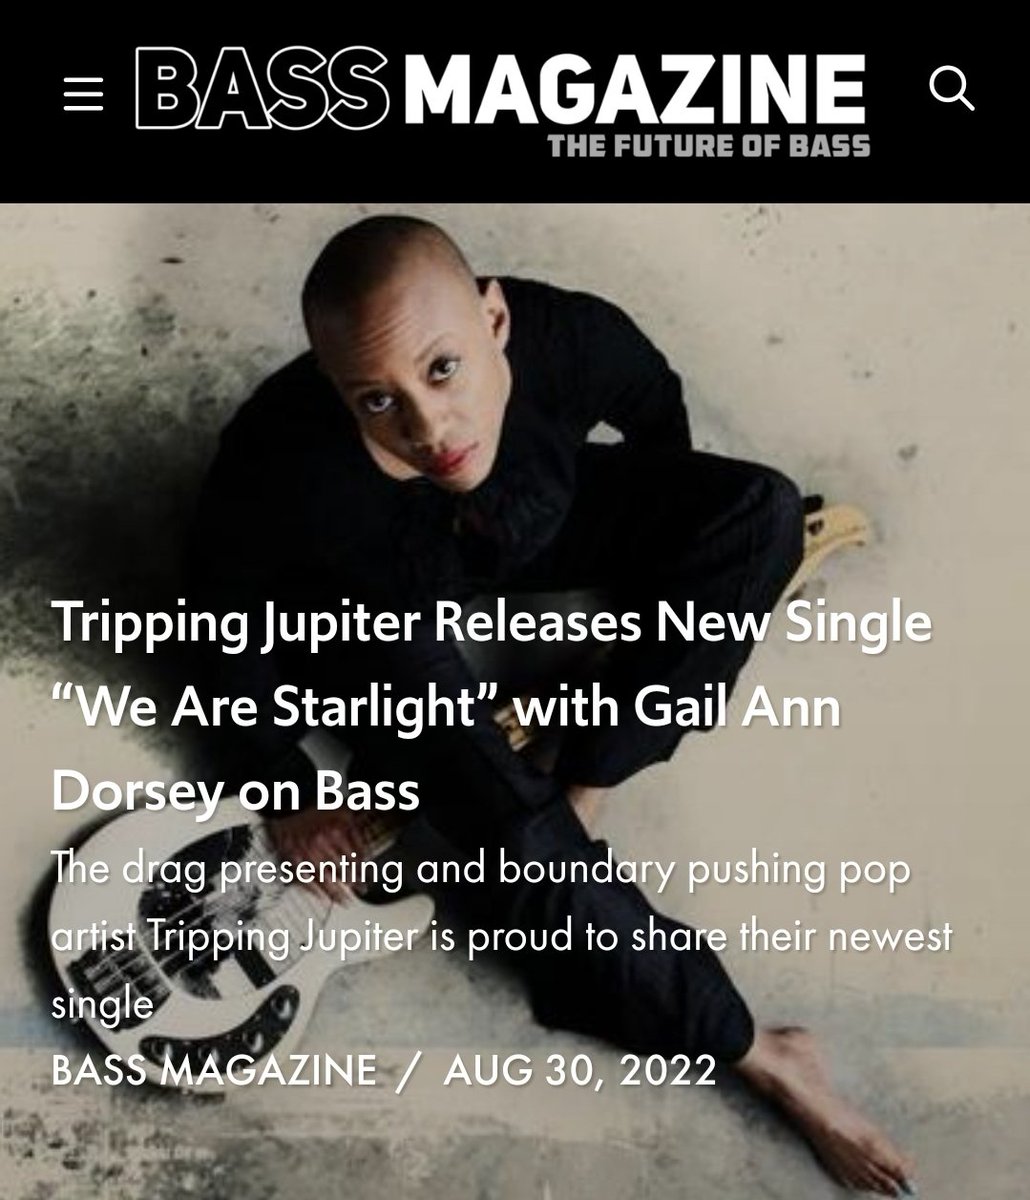 Growing up loving David Bowie and then having his bassist Gail Ann Dorsey playing on our debut record is one of the coolest things to happen since the birth of Tripping Jupiter. Link to We Are Starlight and all our songs in bio. bassmagazine.com/tripping-jupit…